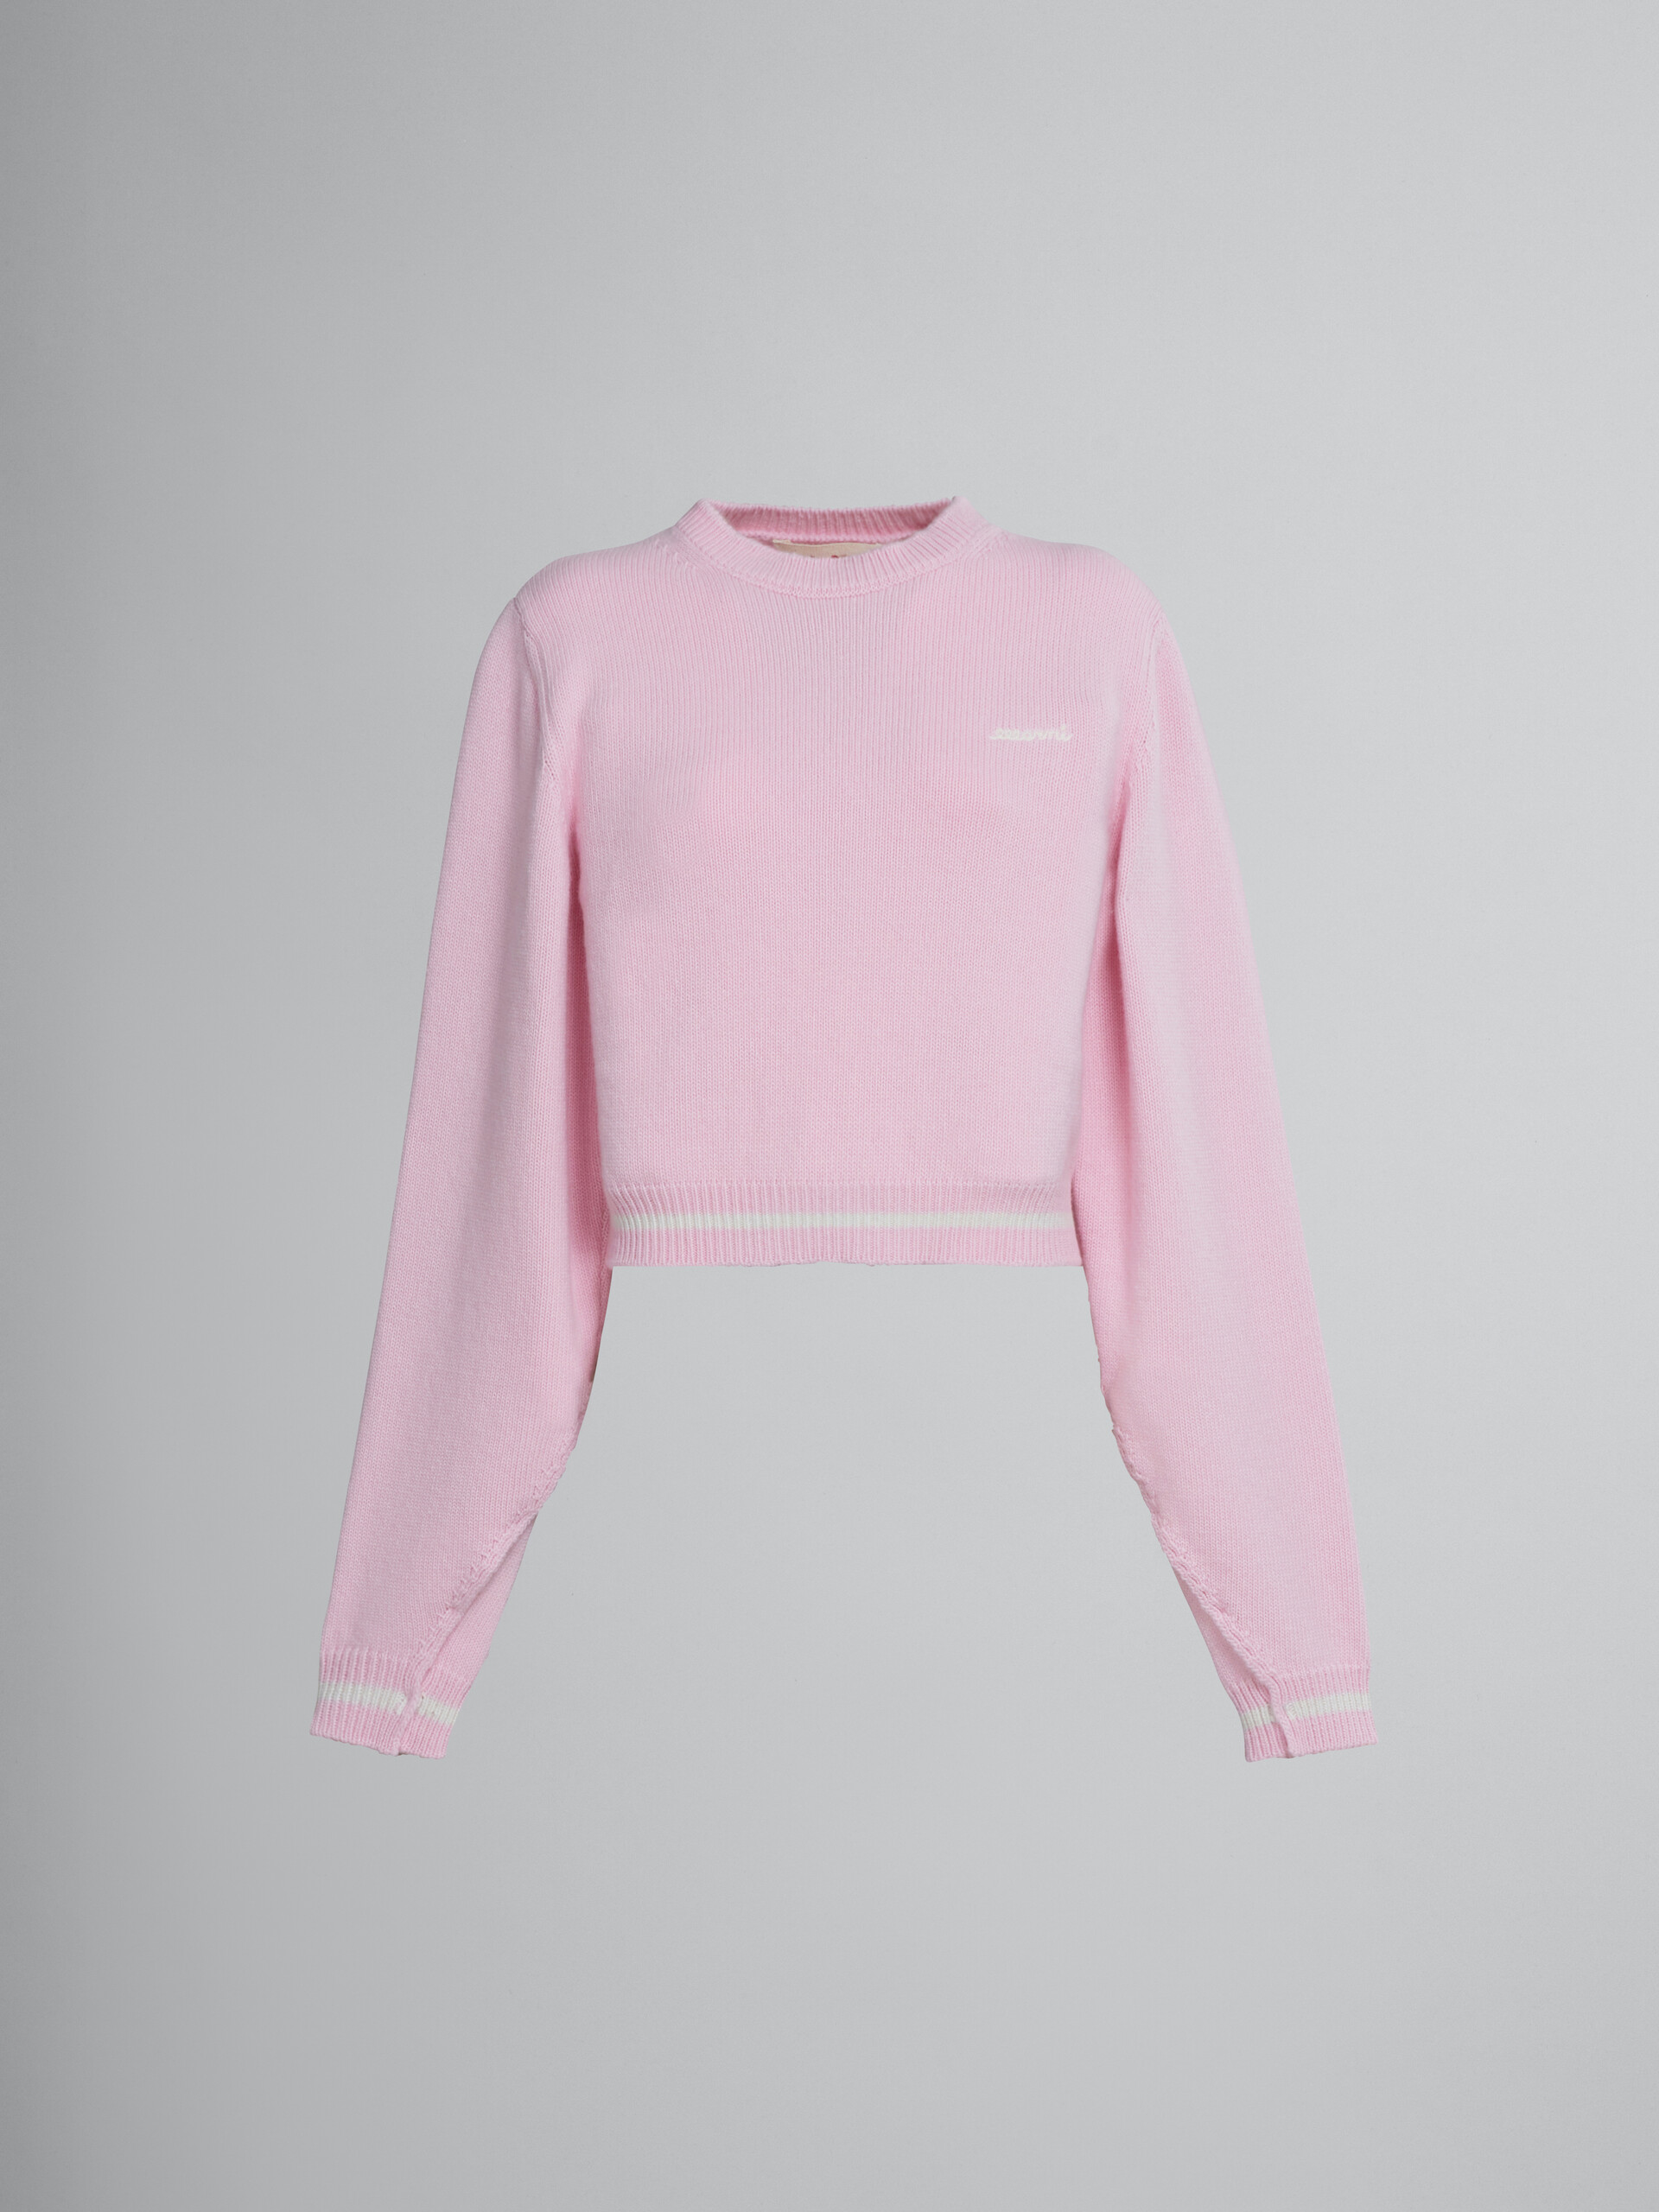 Pink wool sweater with logo - Pullovers - Image 1